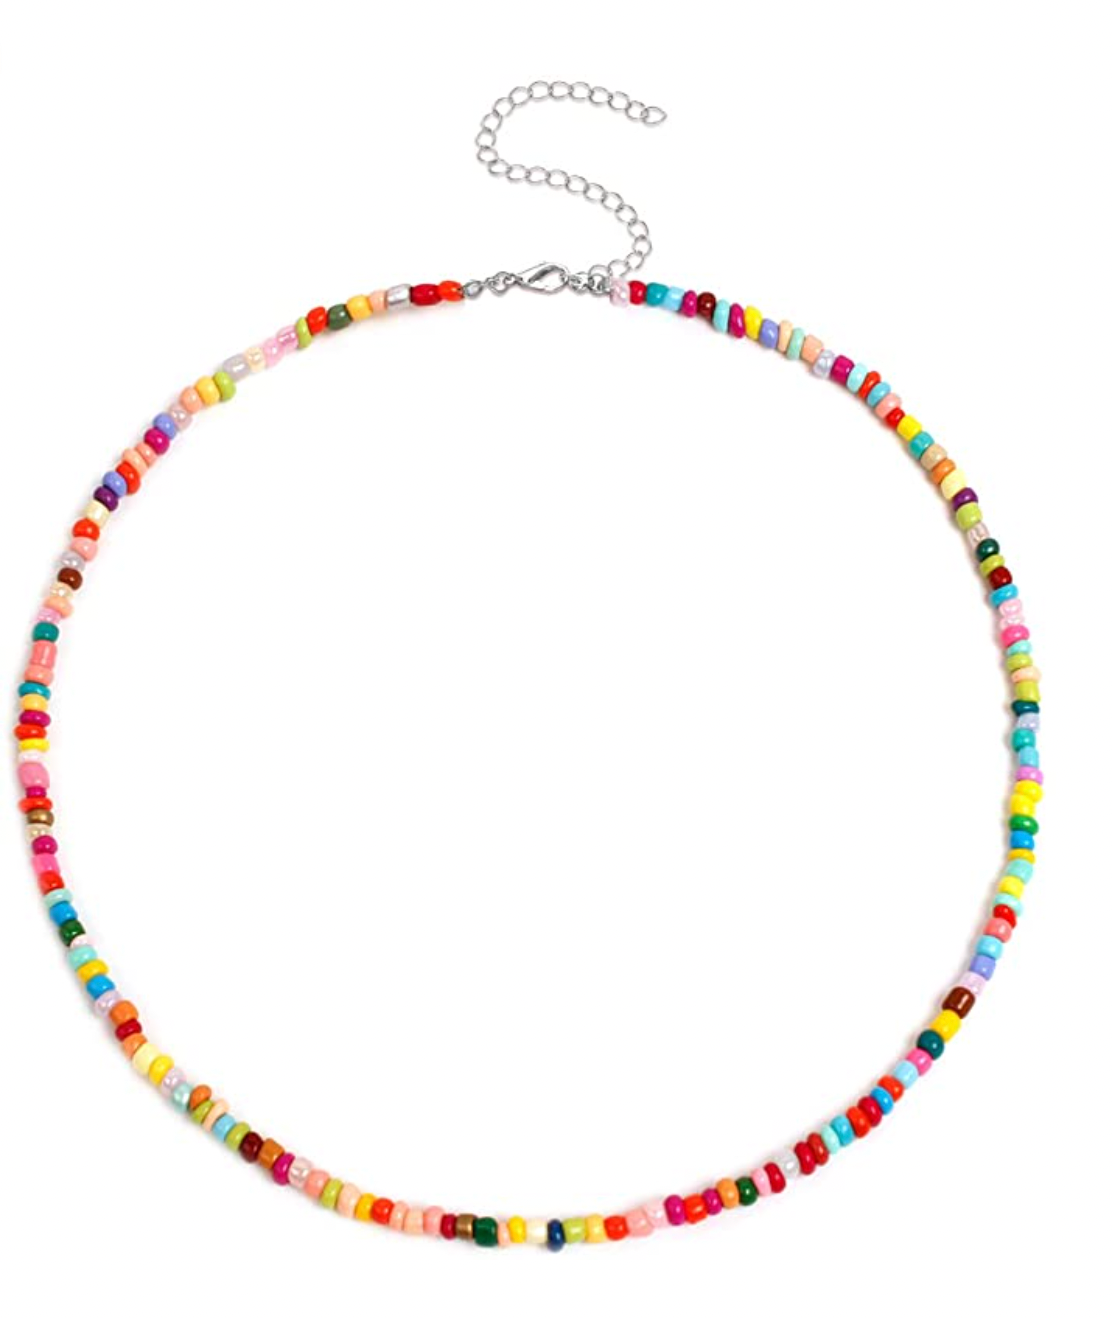 Handmade Colored Beaded Smiley Necklace